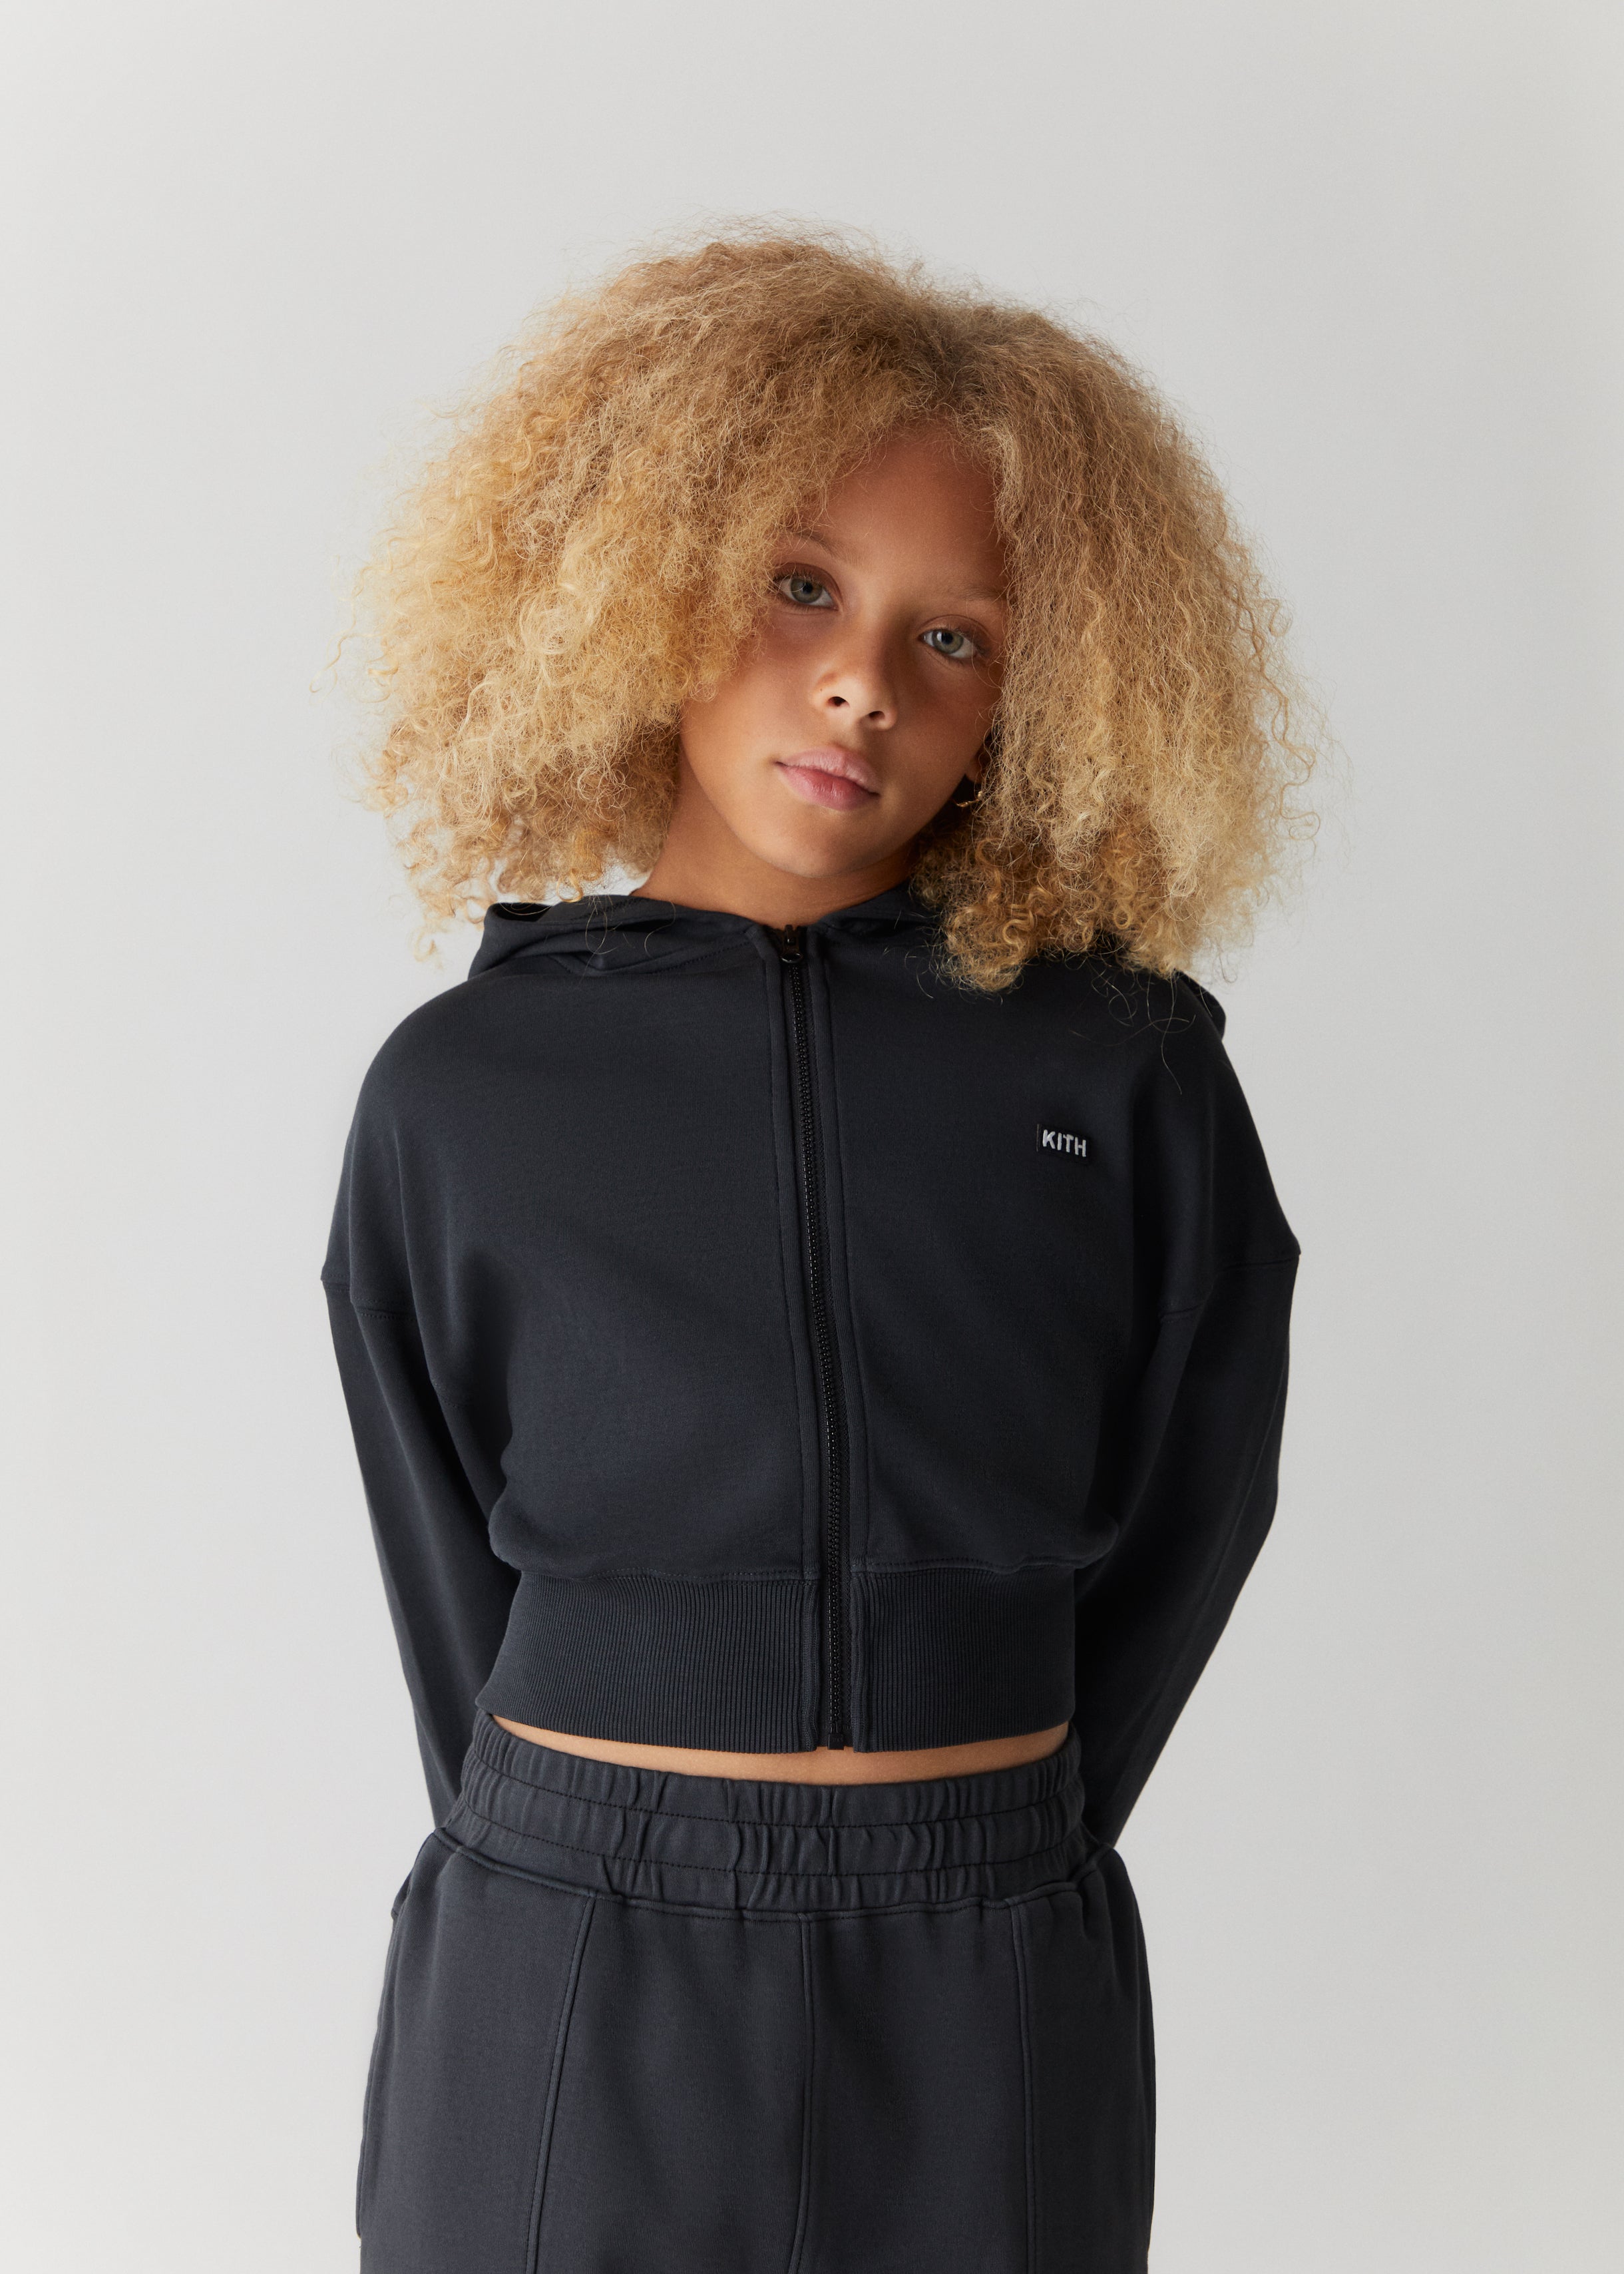 A child wearing a black zip-up hoodie and black sweatpants from the Kith Kids Fall Classics 2023 collection.